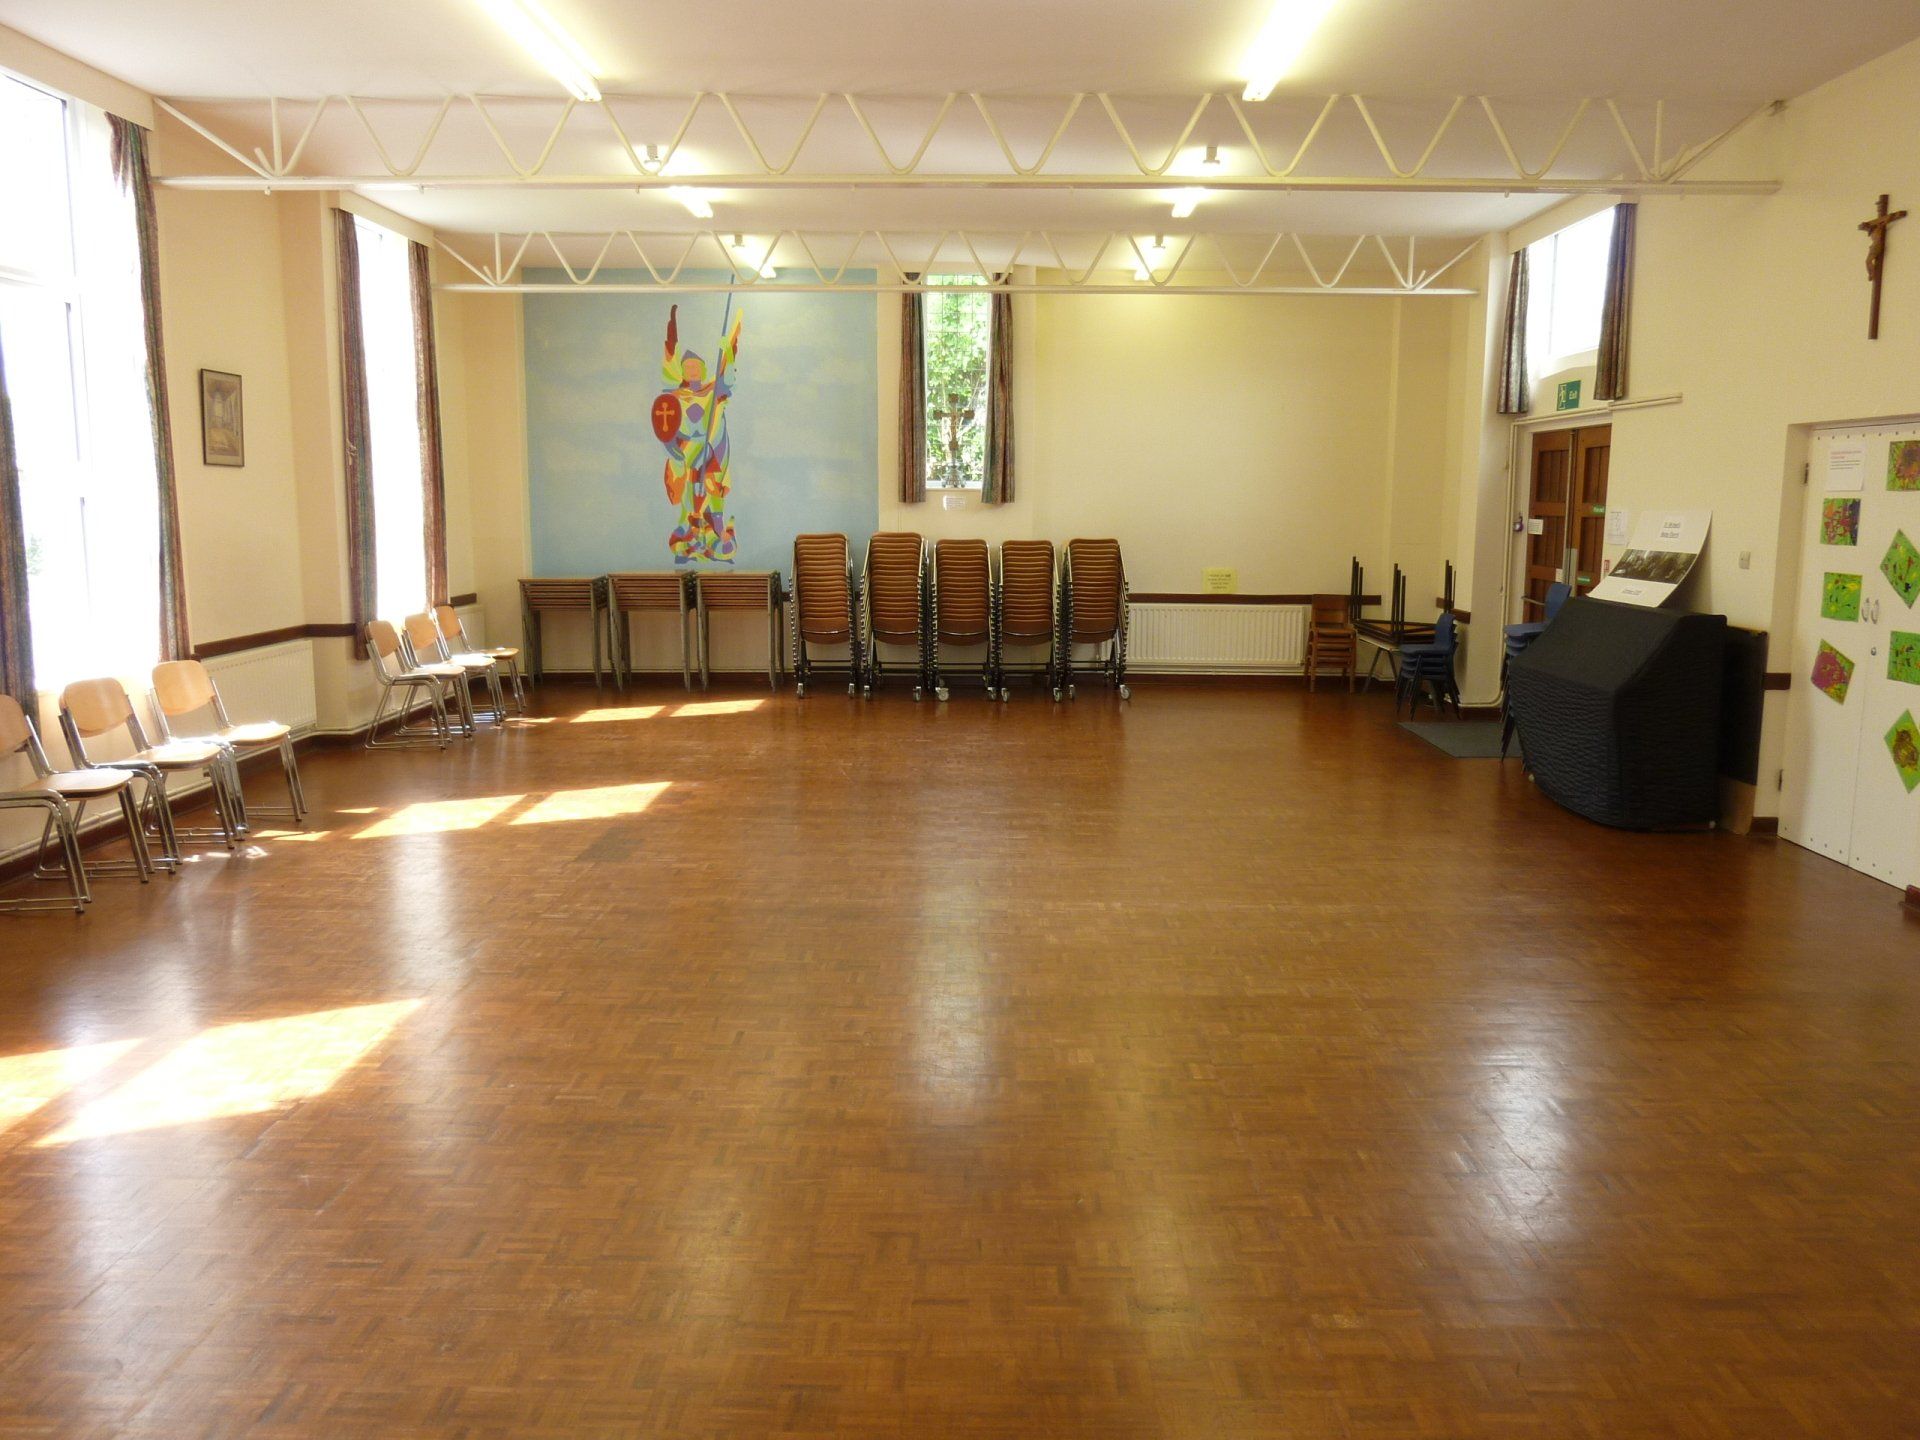 Interior view of St Michael's Church Hall